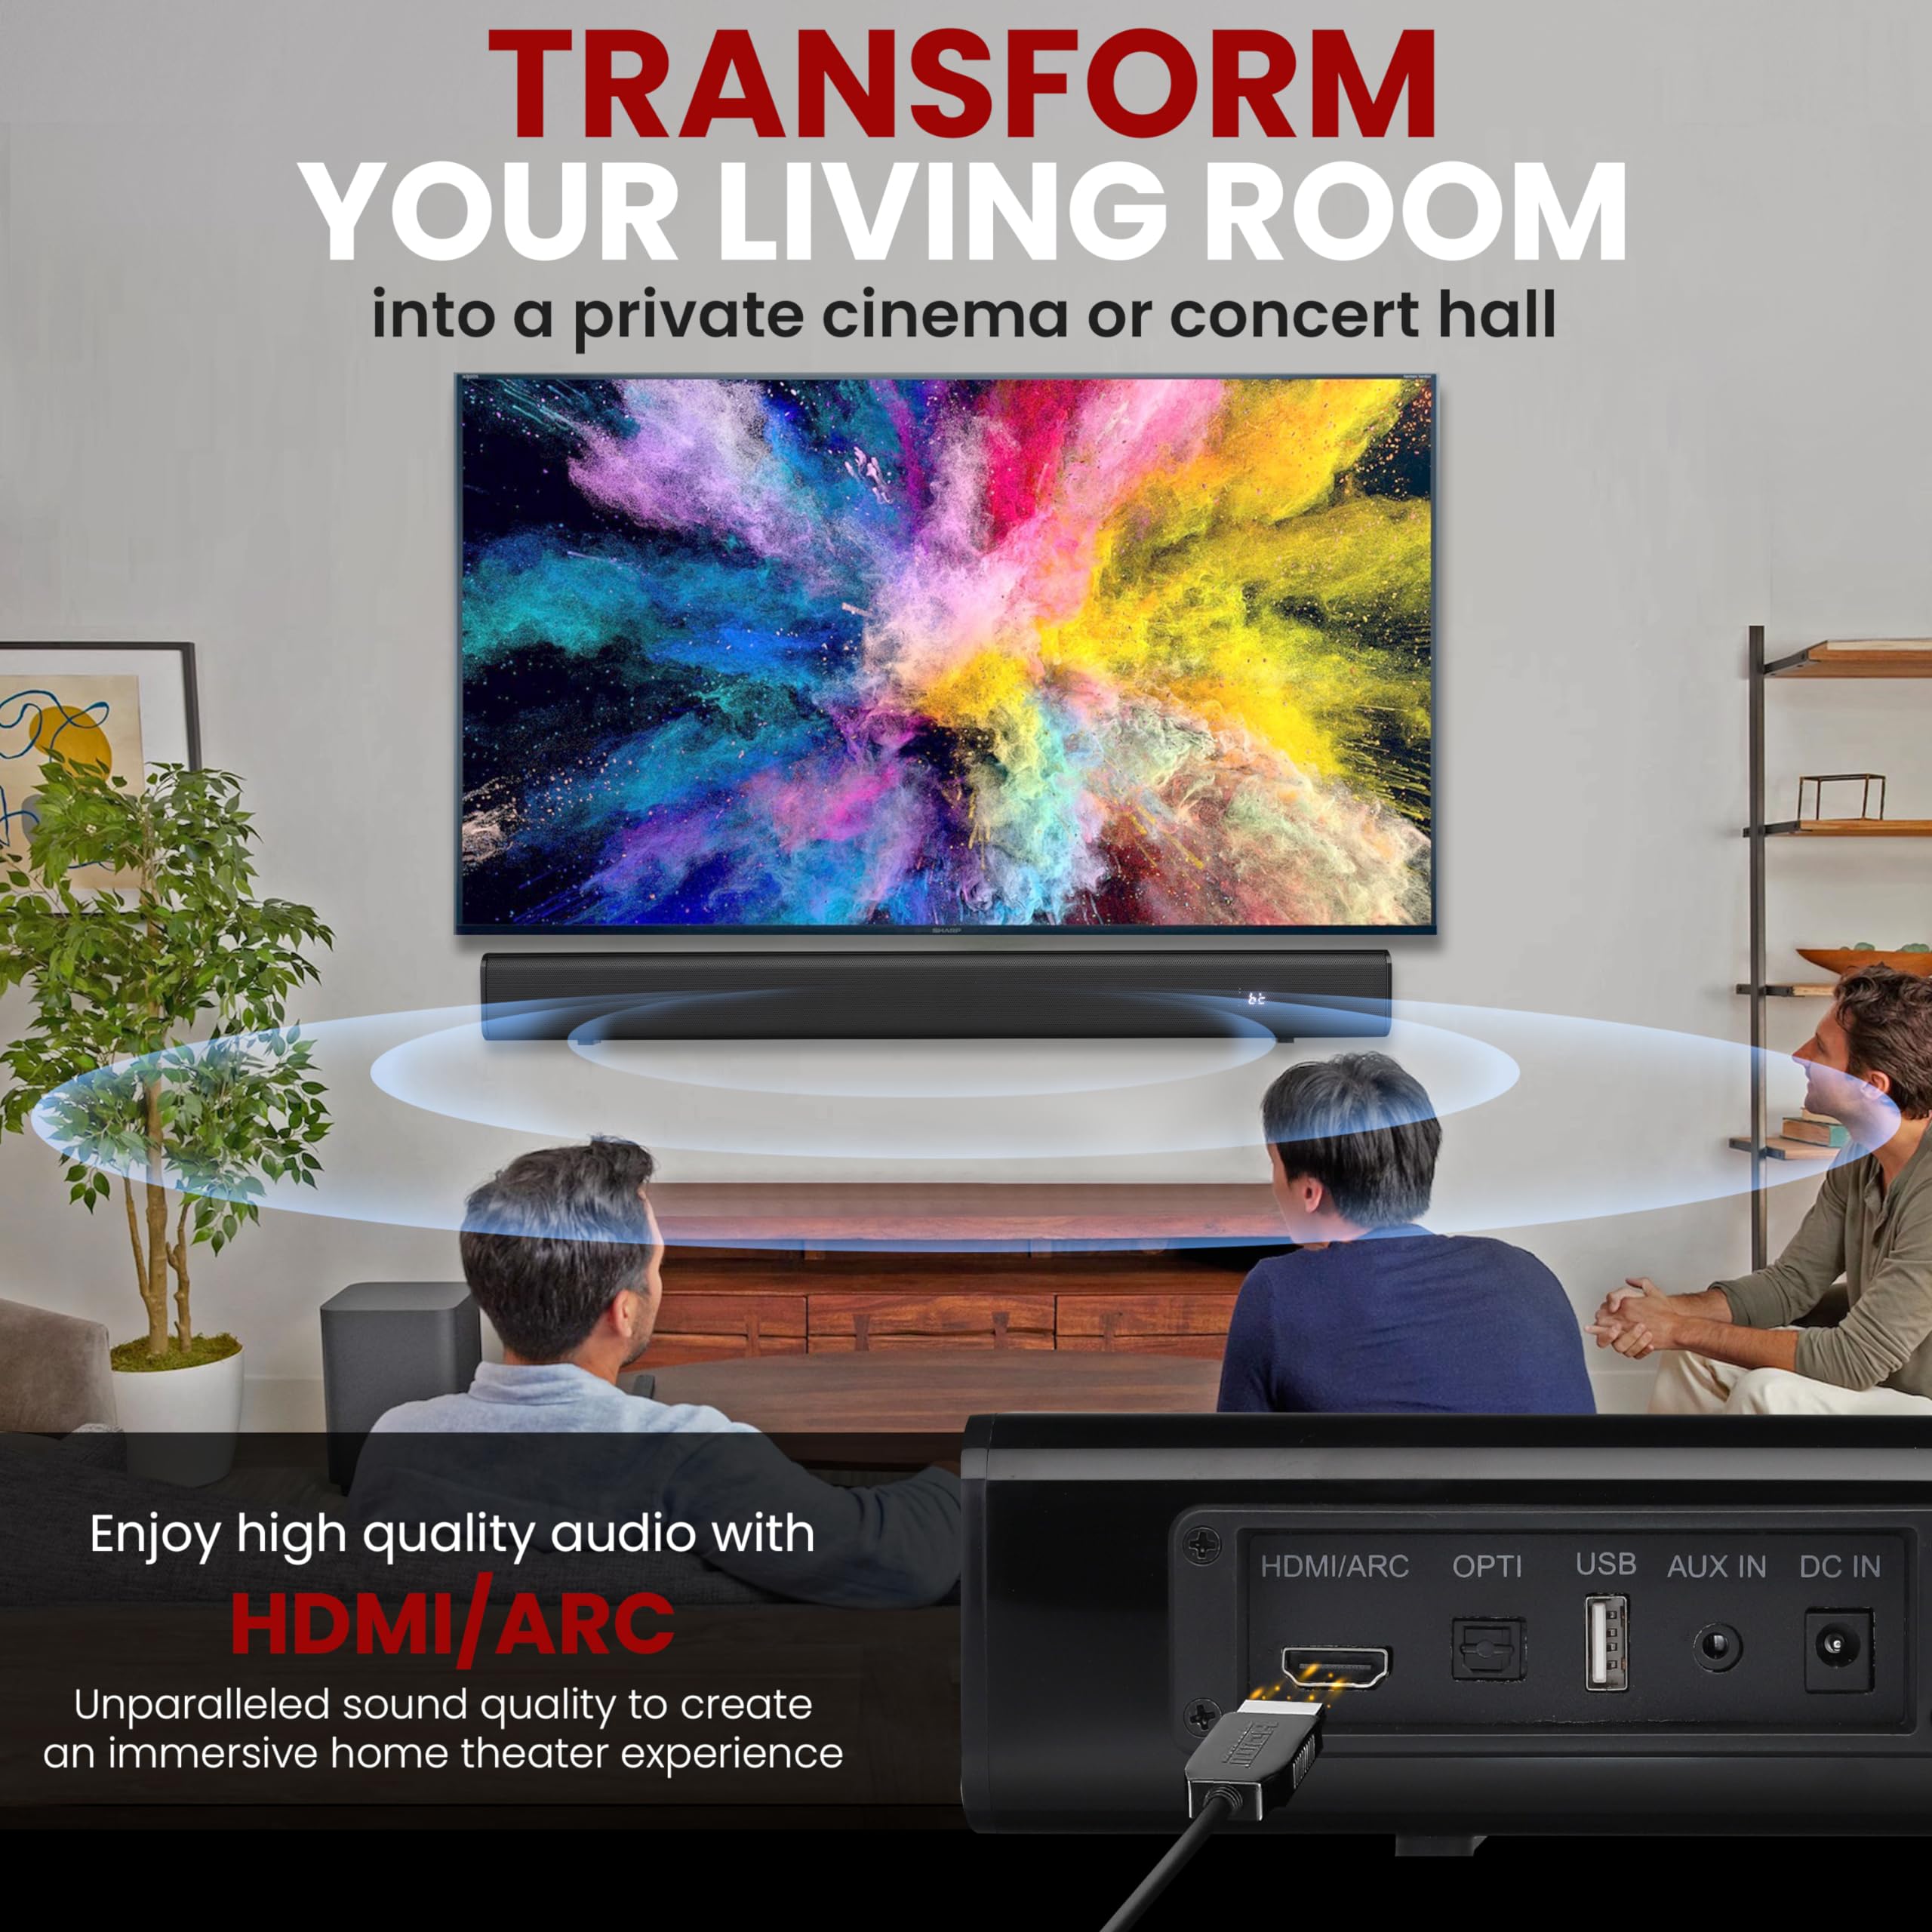 Pyle Home Theater Soundbar Speaker - Wave Base Streaming Tabletop Stand Mount TV Digital System with AUX/Digital Optical Audio Connector Jacks/USB Port, HDMI /ARC, Full Sound Reproduction